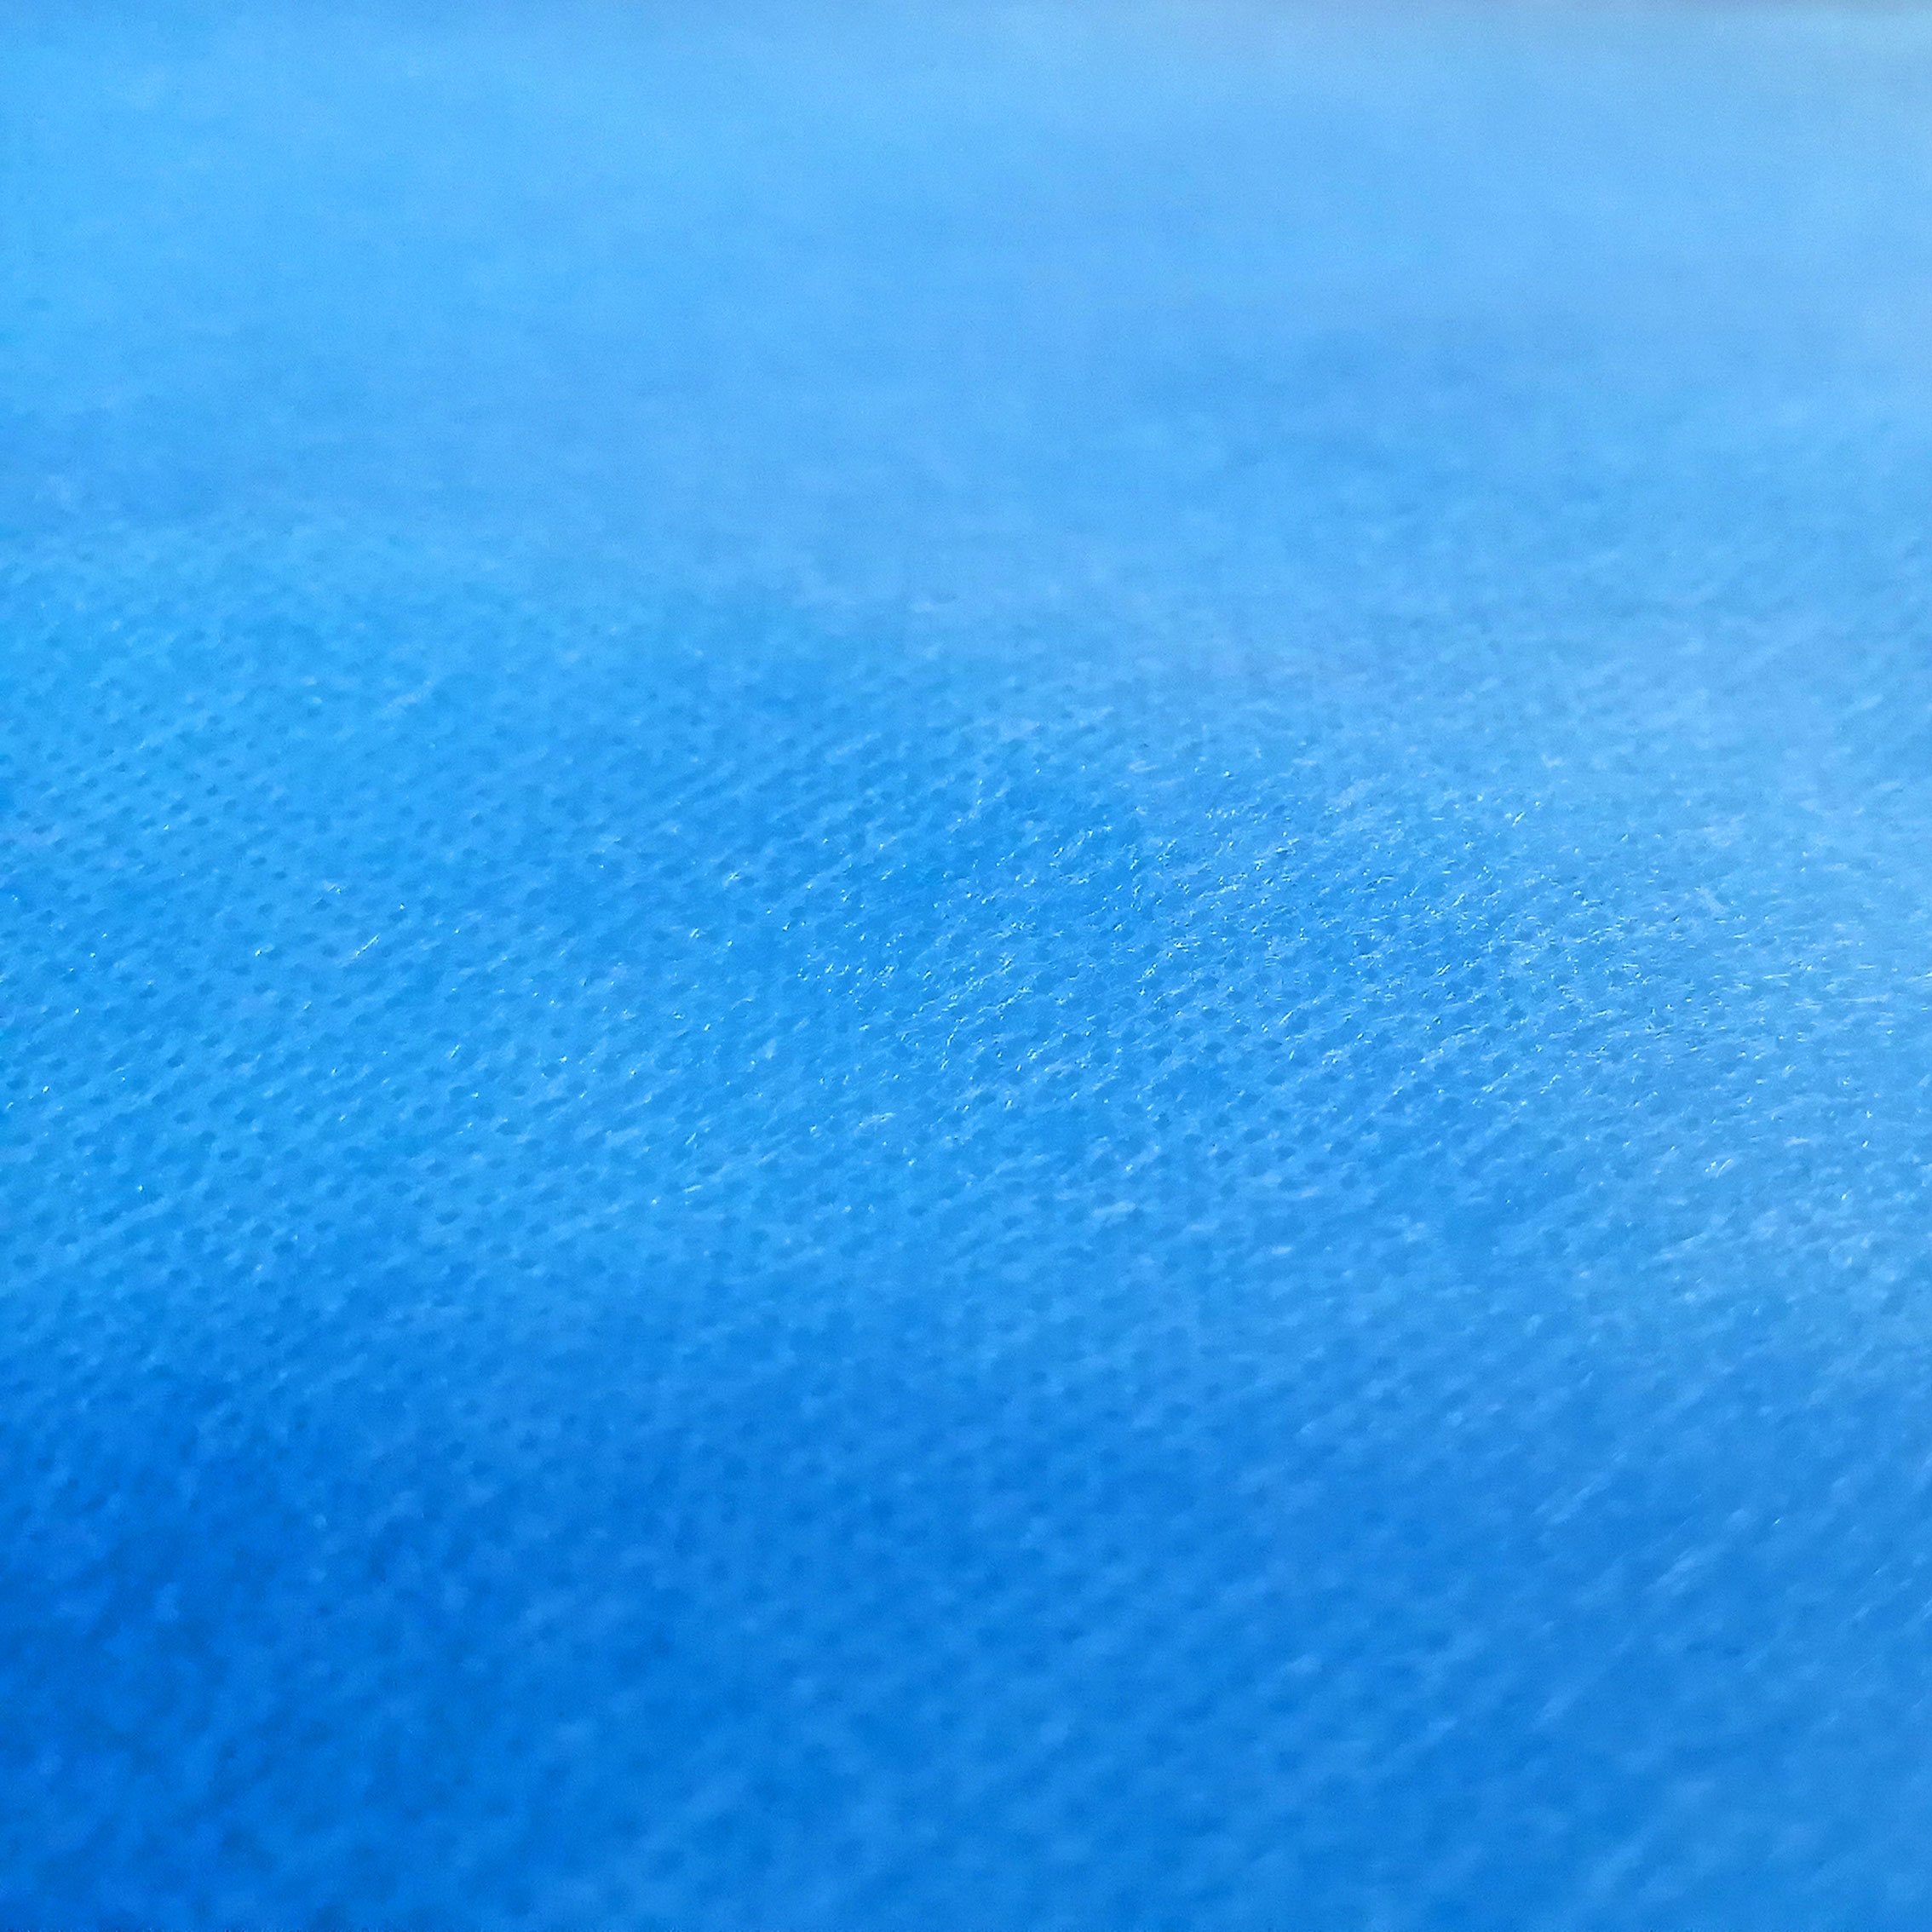 pp polypropylene NonWoven smms nonwoven fabric for medical suits